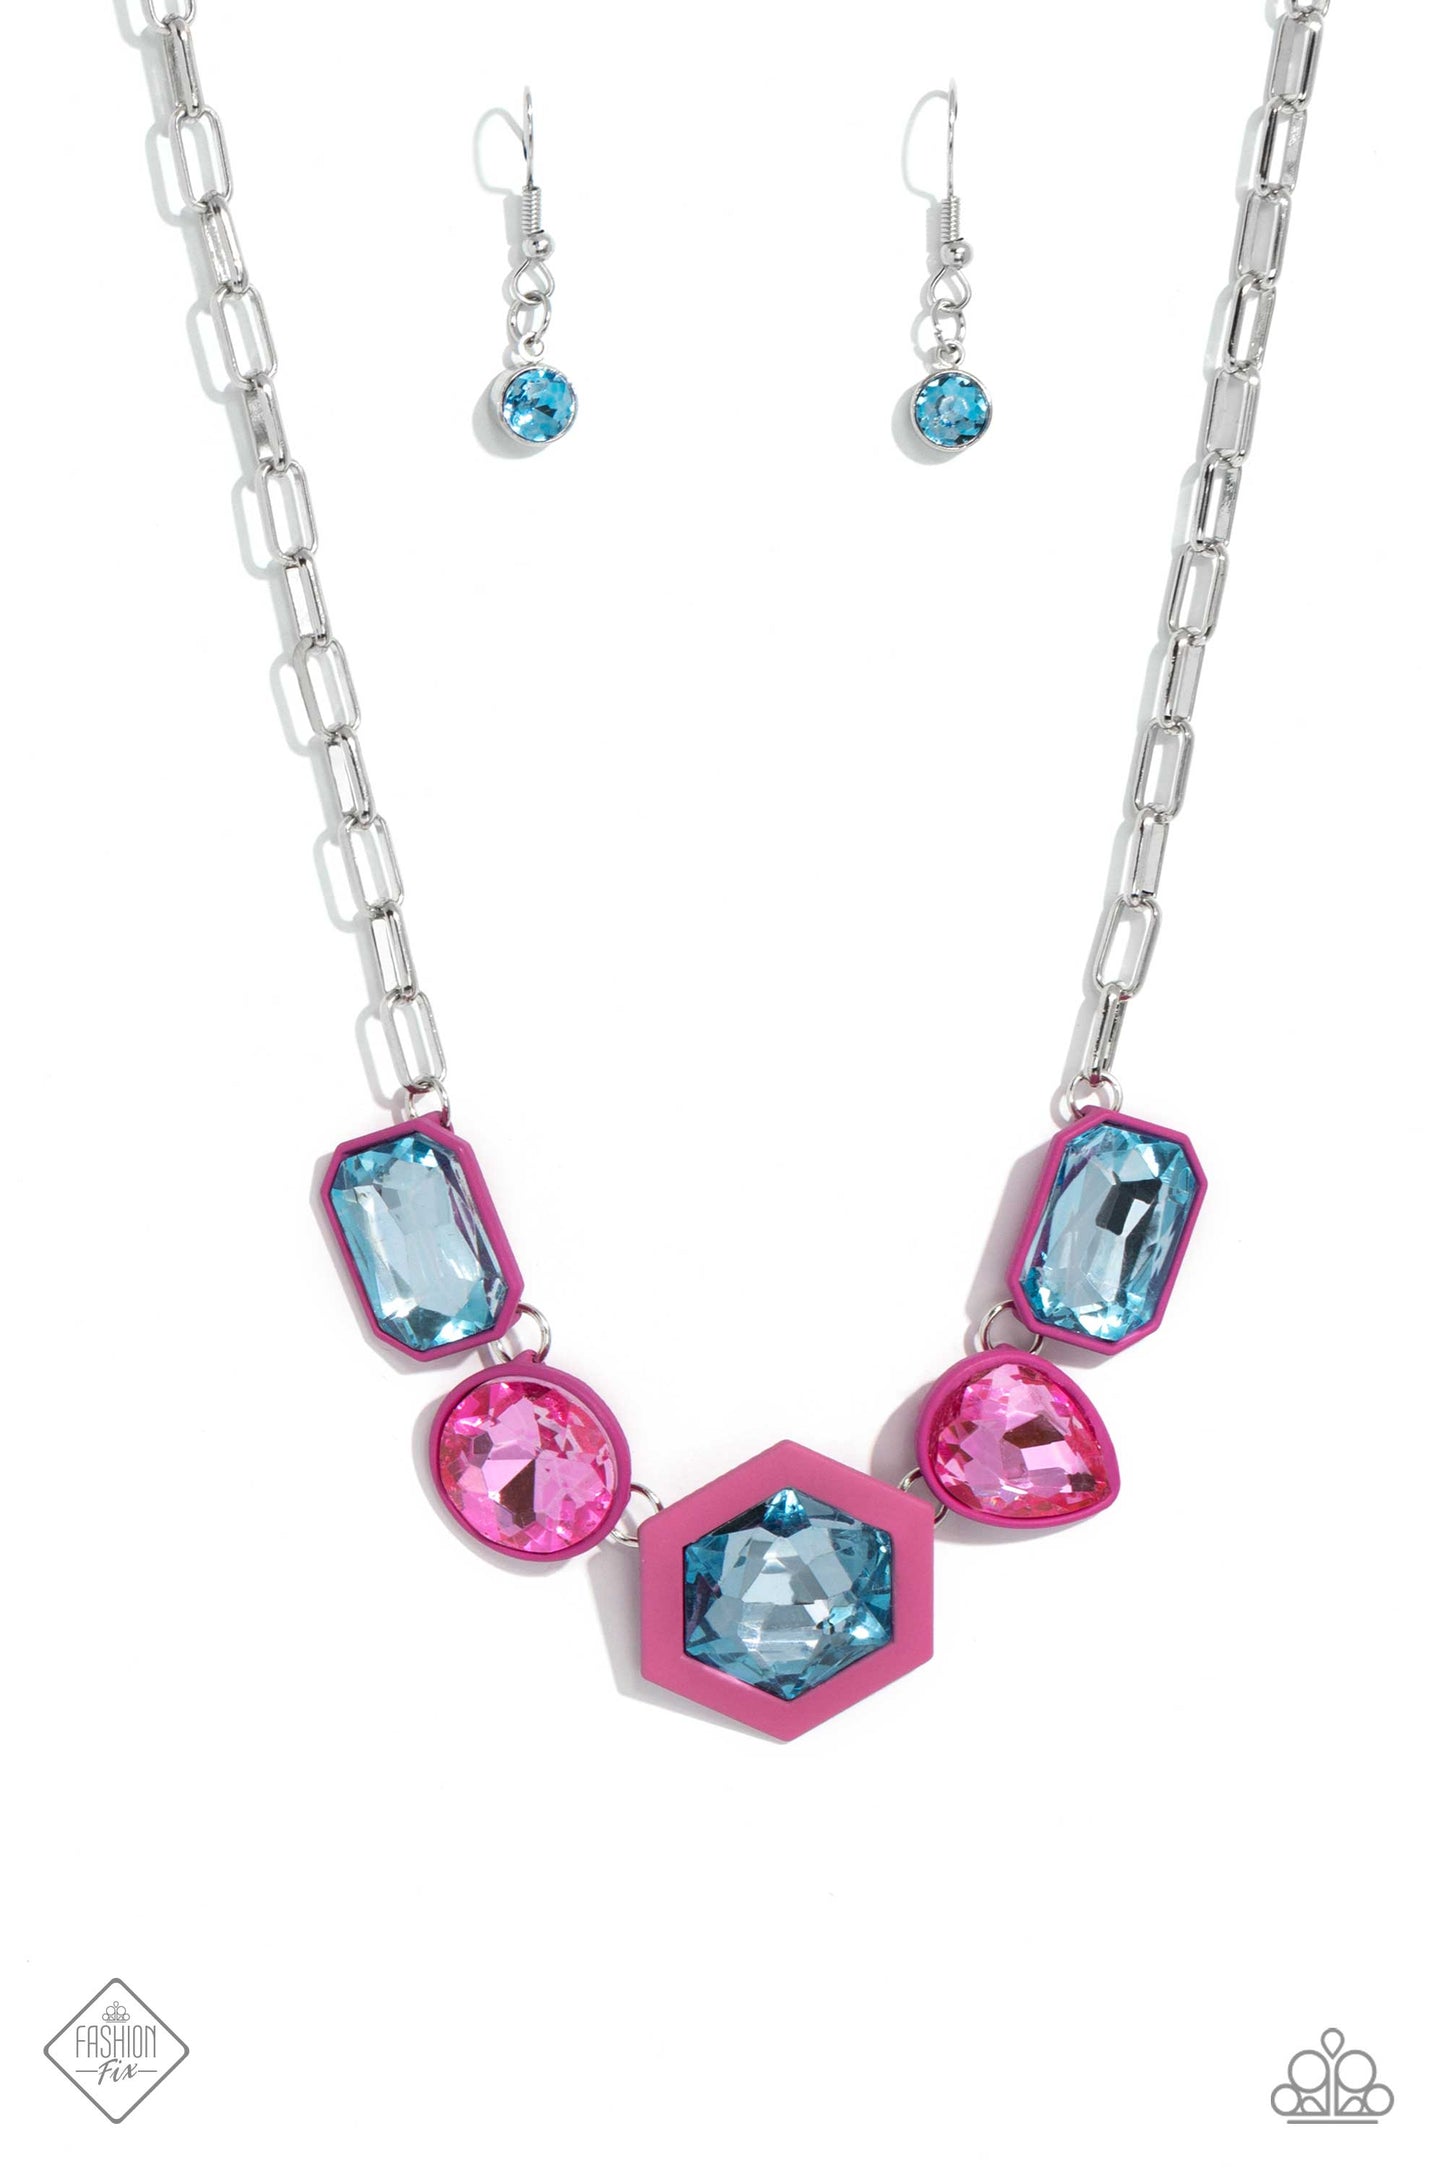 Evolving Elegance - Pink and Blue Necklace - Paparazzi Accessories - Featuring a unique rubber-like backdrop in a vibrant hue of Rose Violet, a collection of oversized gems in light blue and bright pink links below the collar on a silver paperclip chain for a jaw-dropping statement.